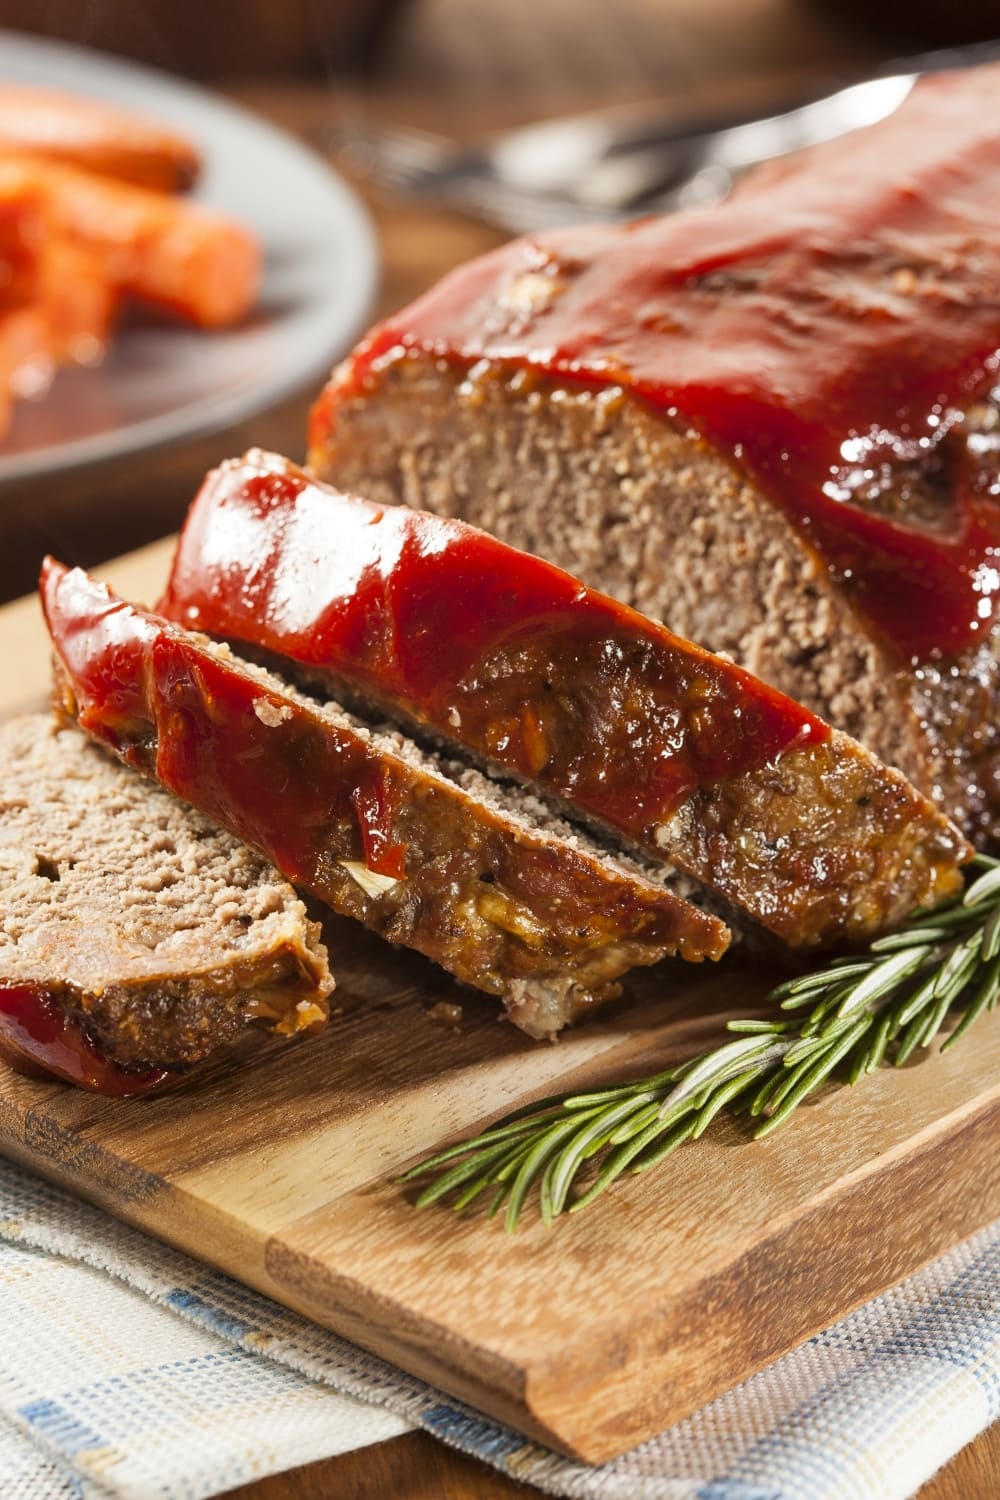 Ground Beef Meatloaf with Ketchup